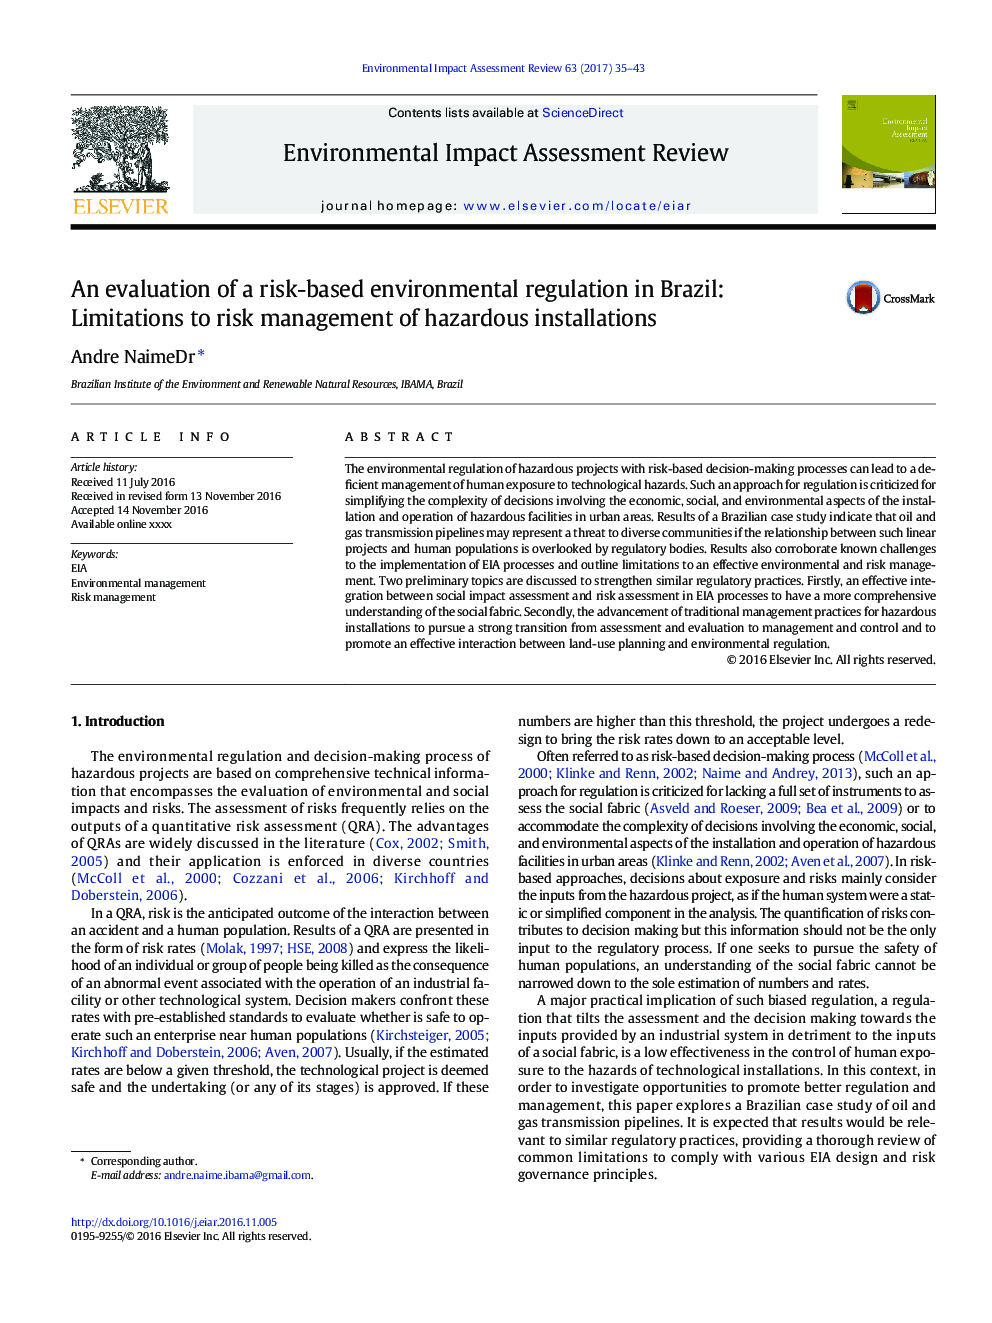 An evaluation of a risk-based environmental regulation in Brazil: Limitations to risk management of hazardous installations